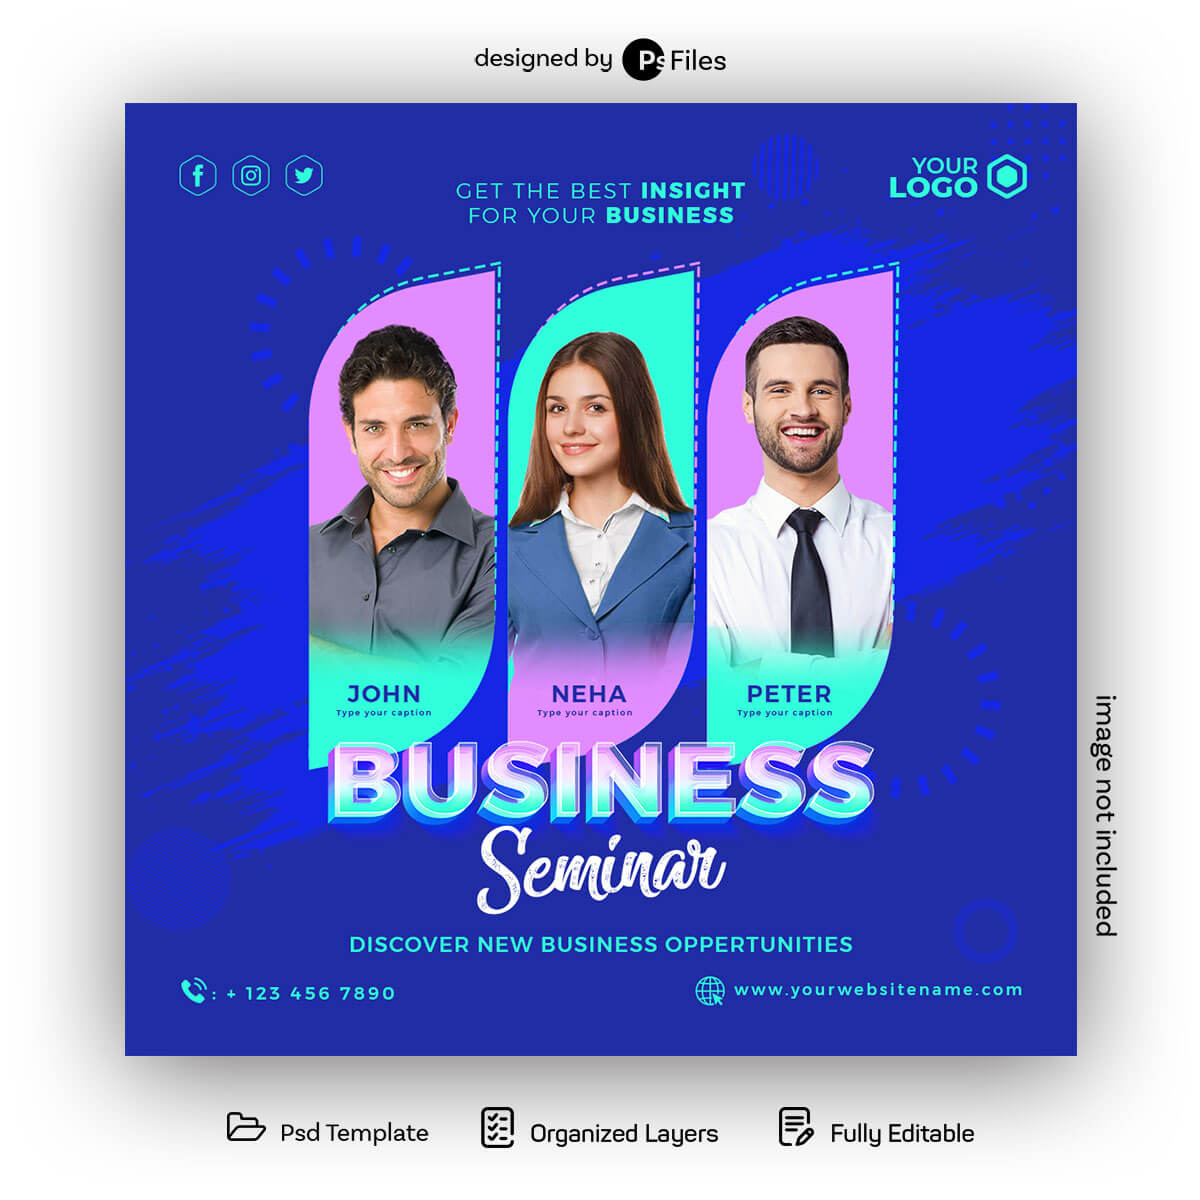 Talk Show Business Seminar and Shows Promoting Social Media Poster PSD Free Download